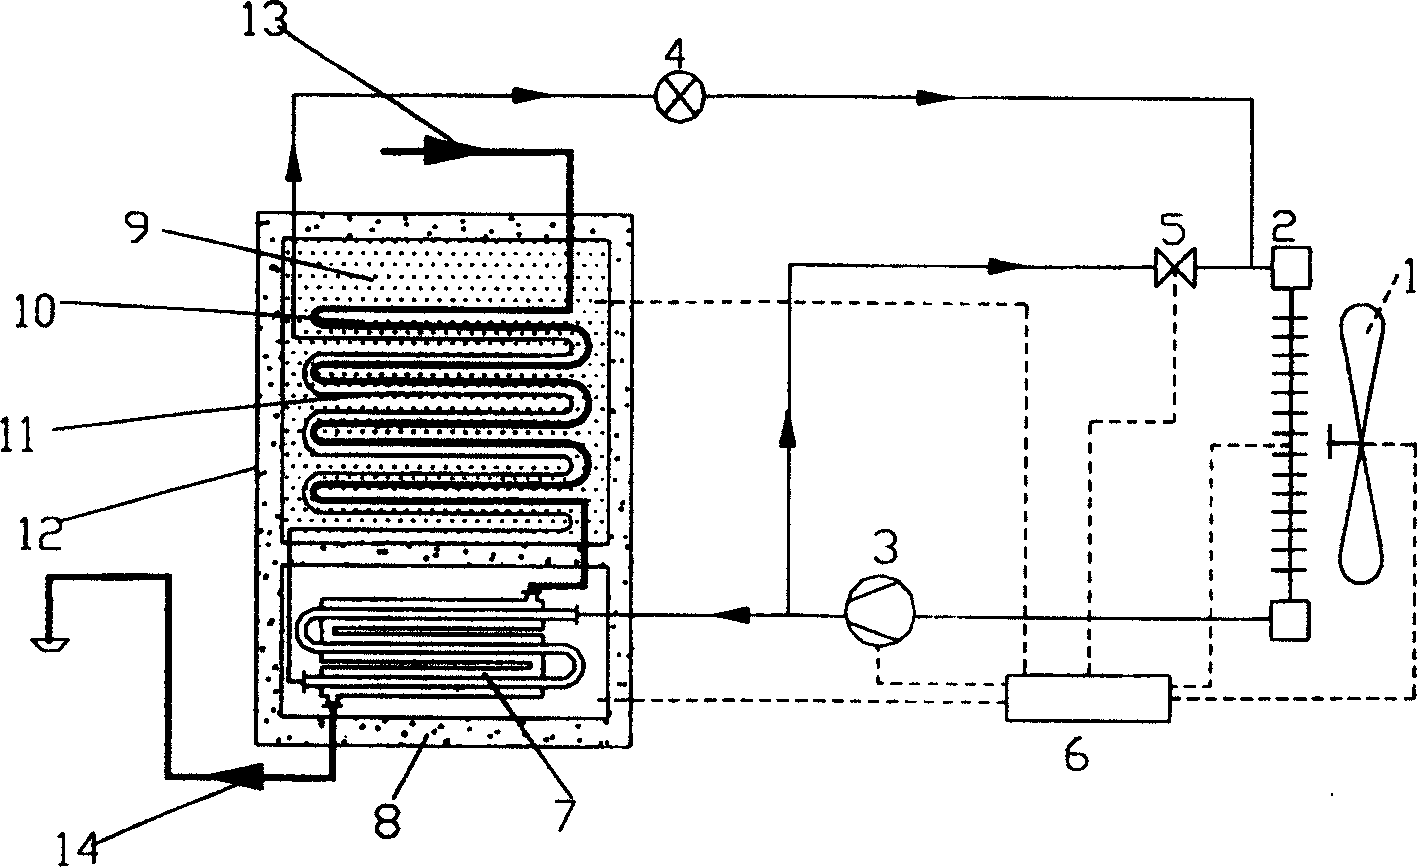 Preheating type heat pump water heater using stored heat caused by phase change